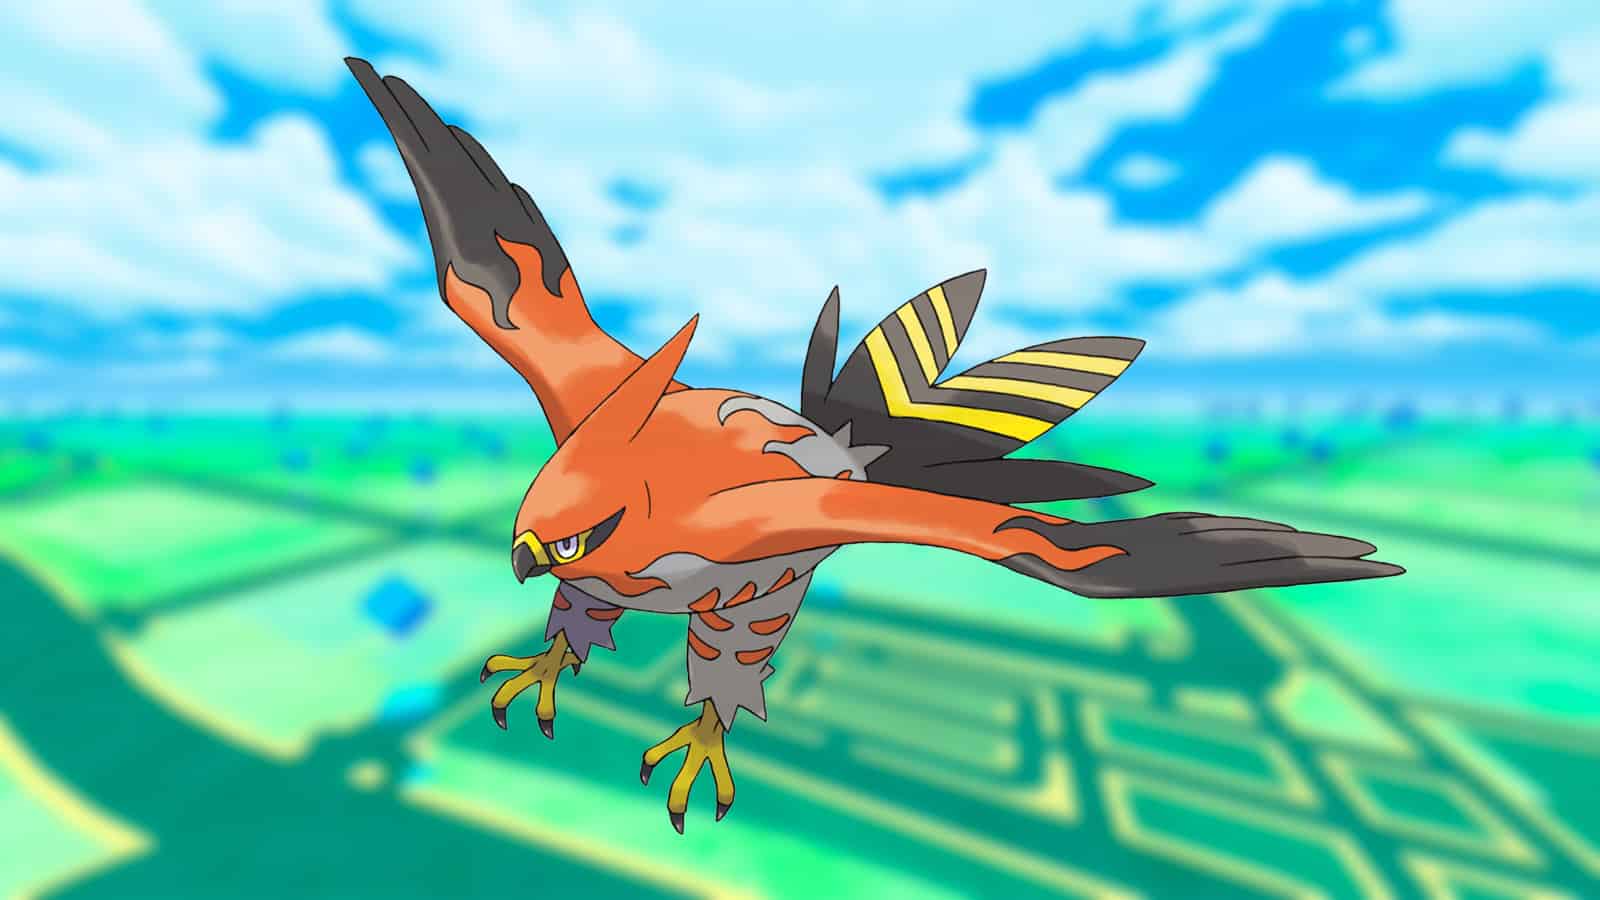 Talonflame in Pokemon Go's Ultra League